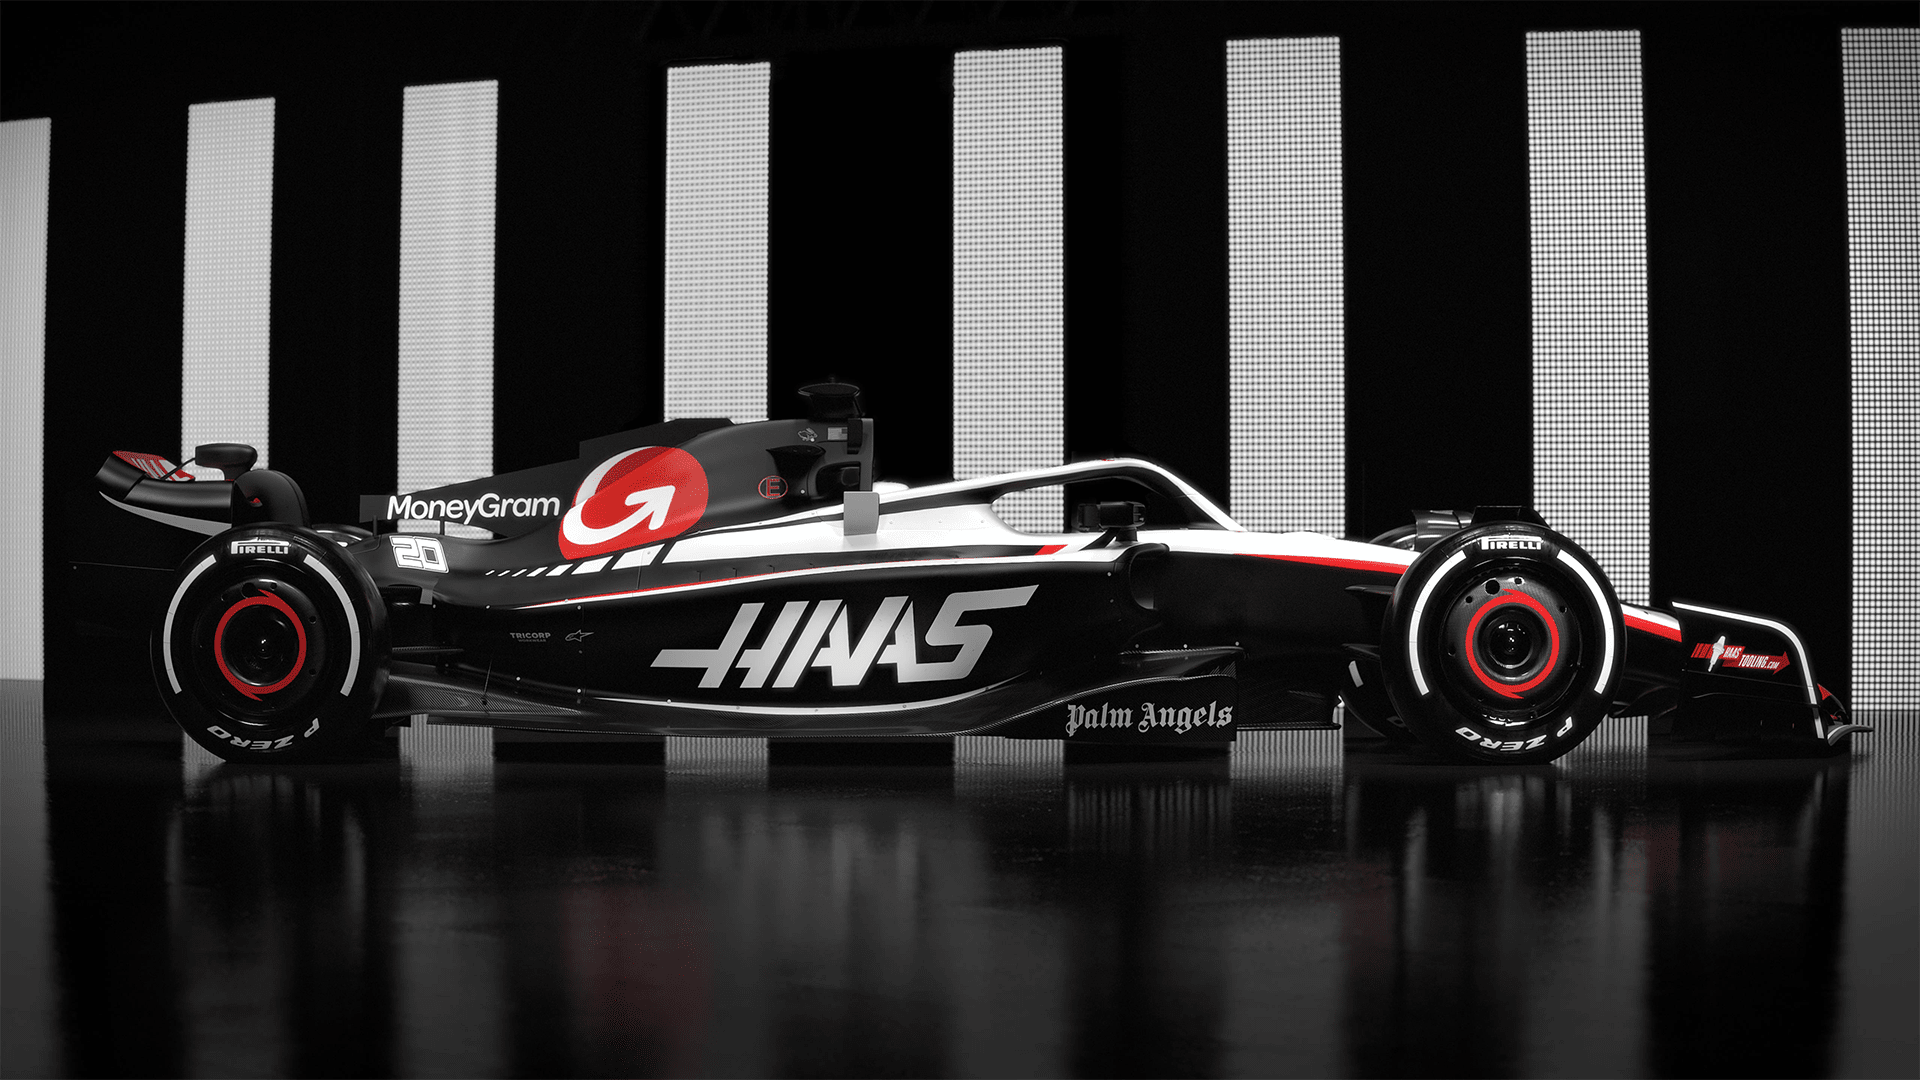 GALLERY Take a closer look at the allnew Haas livery for the 2023 F1